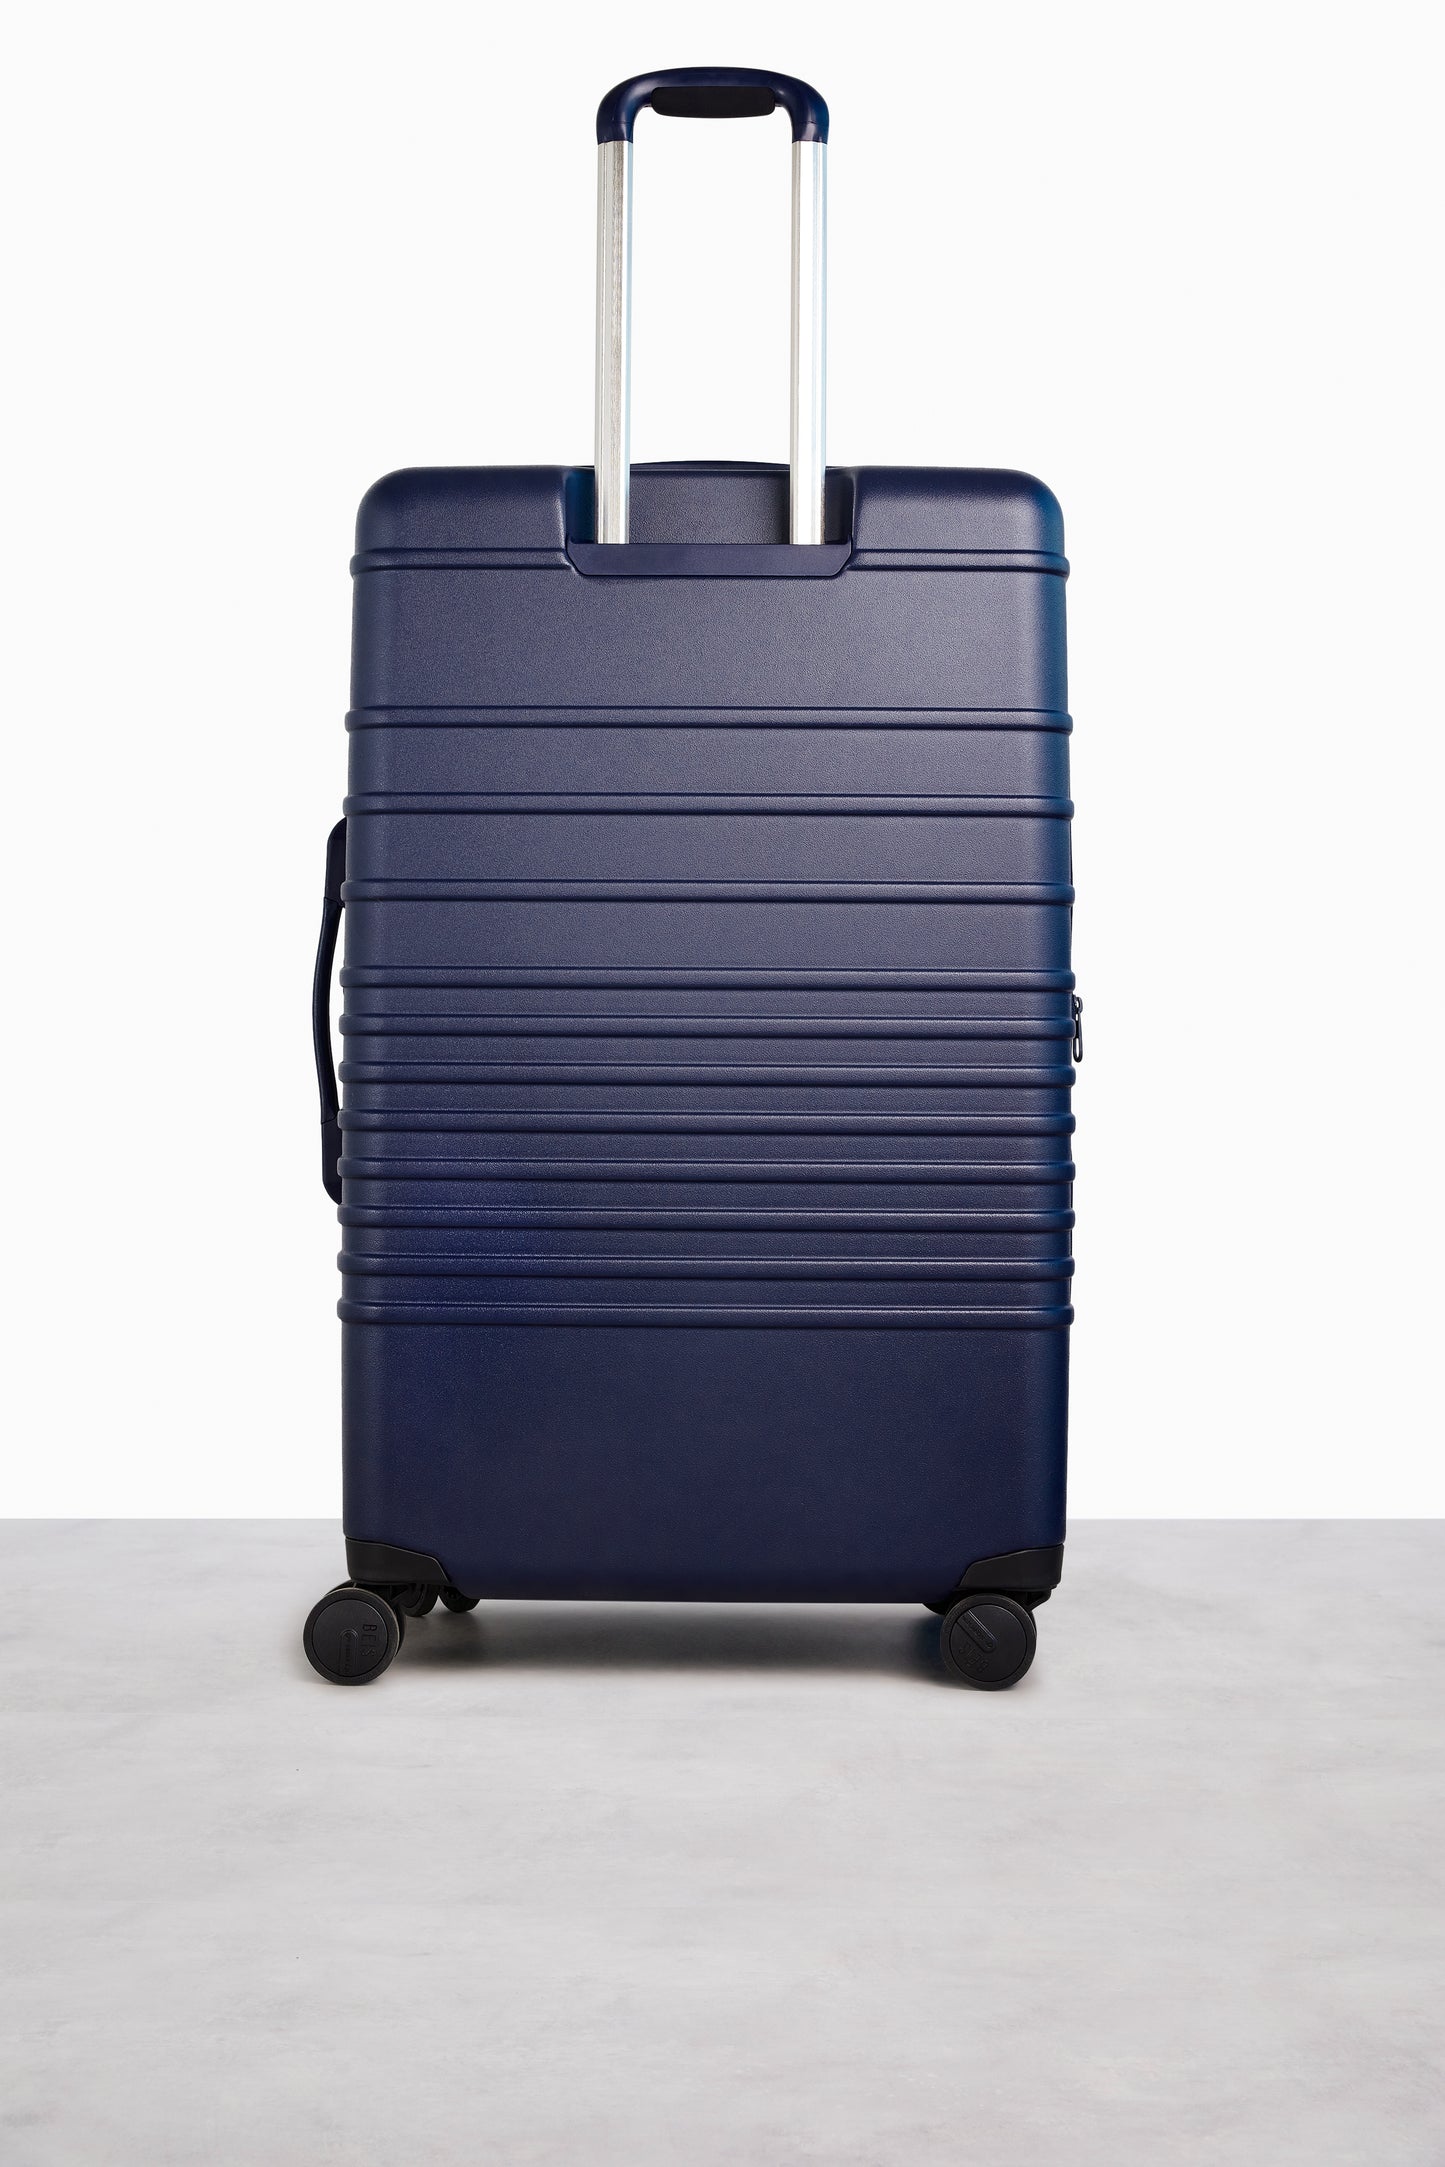 The 29" Large Check-In Roller in Navy